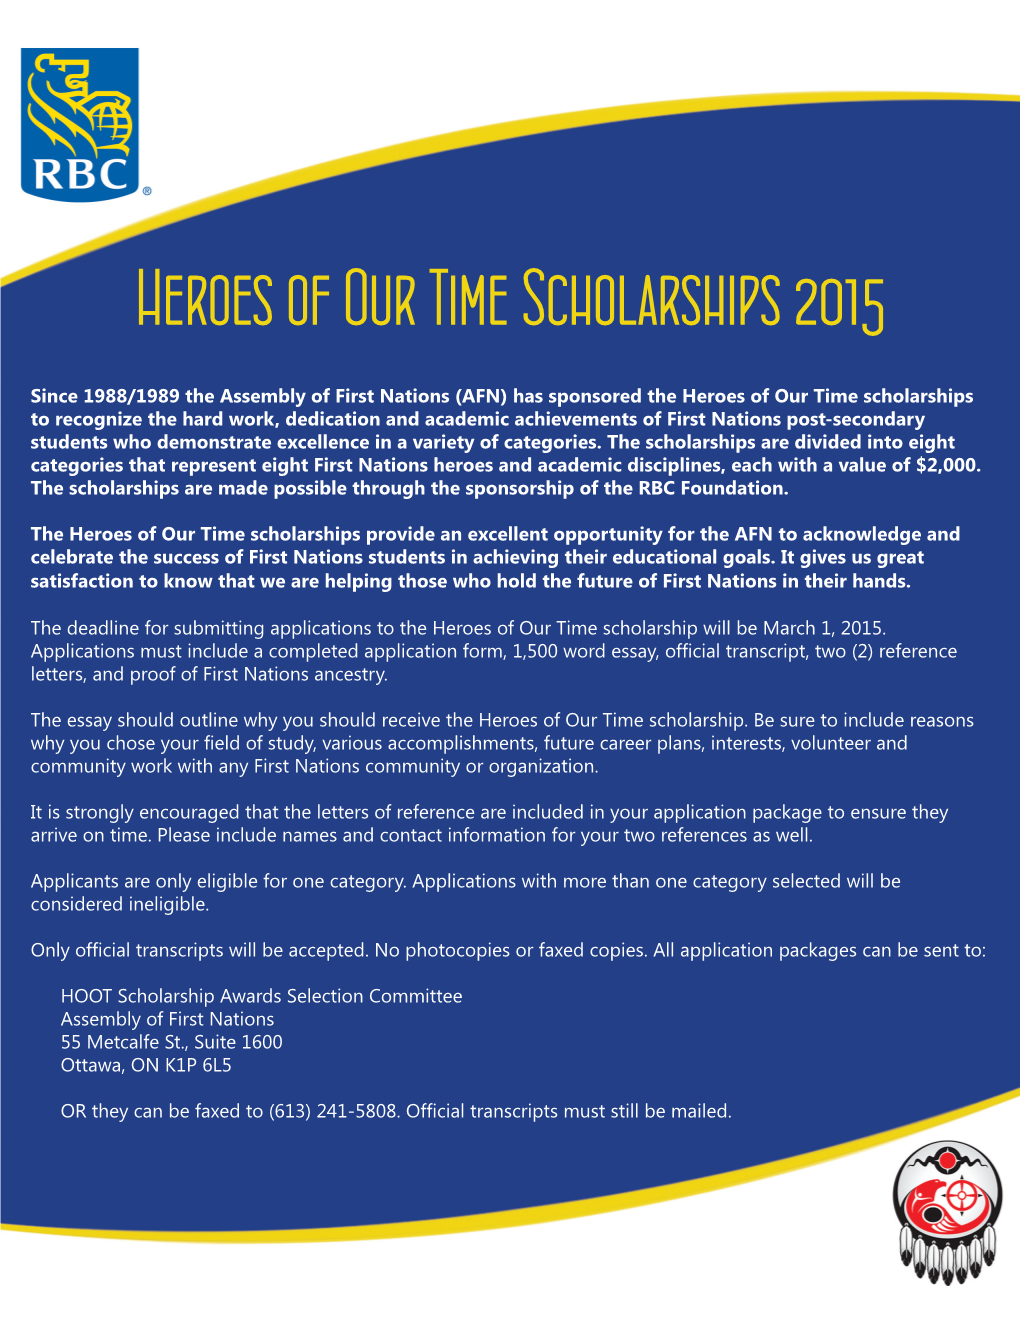 Heroes of Our Time Scholarships 2015